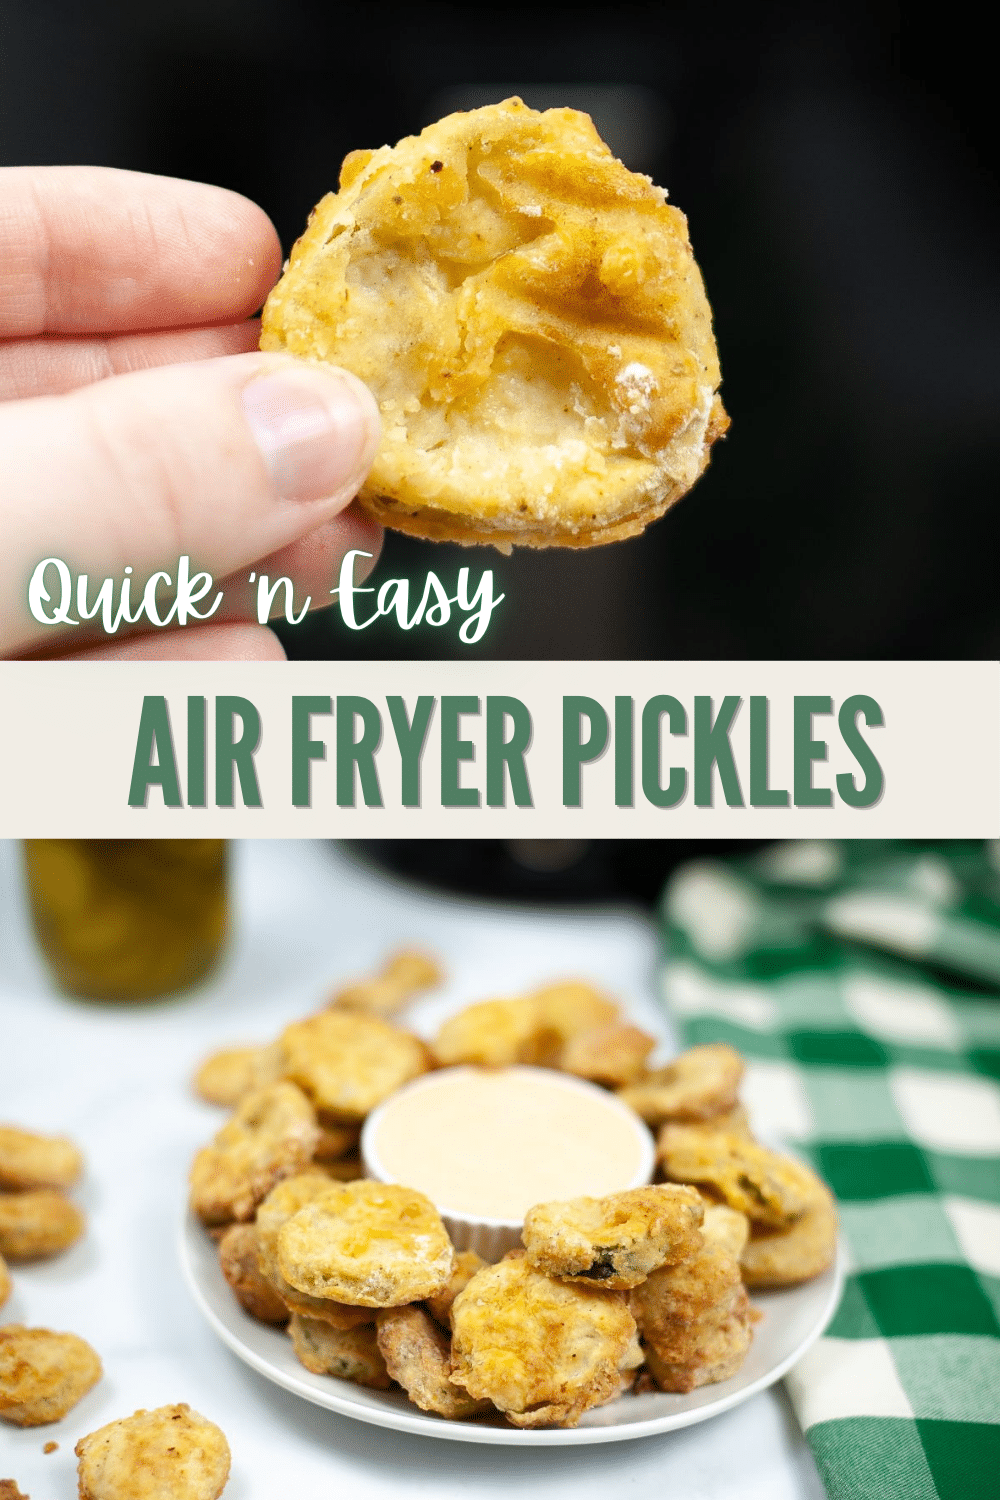 top image is a closeup of a person's hand holding a pickle chip, bottom image is Air Fryer Pickles on a white plate with dipping sauce in the middle with a jar of pickles, an air fryer and a green and white checkered cloth blurred in the background with title text in the middle reading Air Fryer Pickles